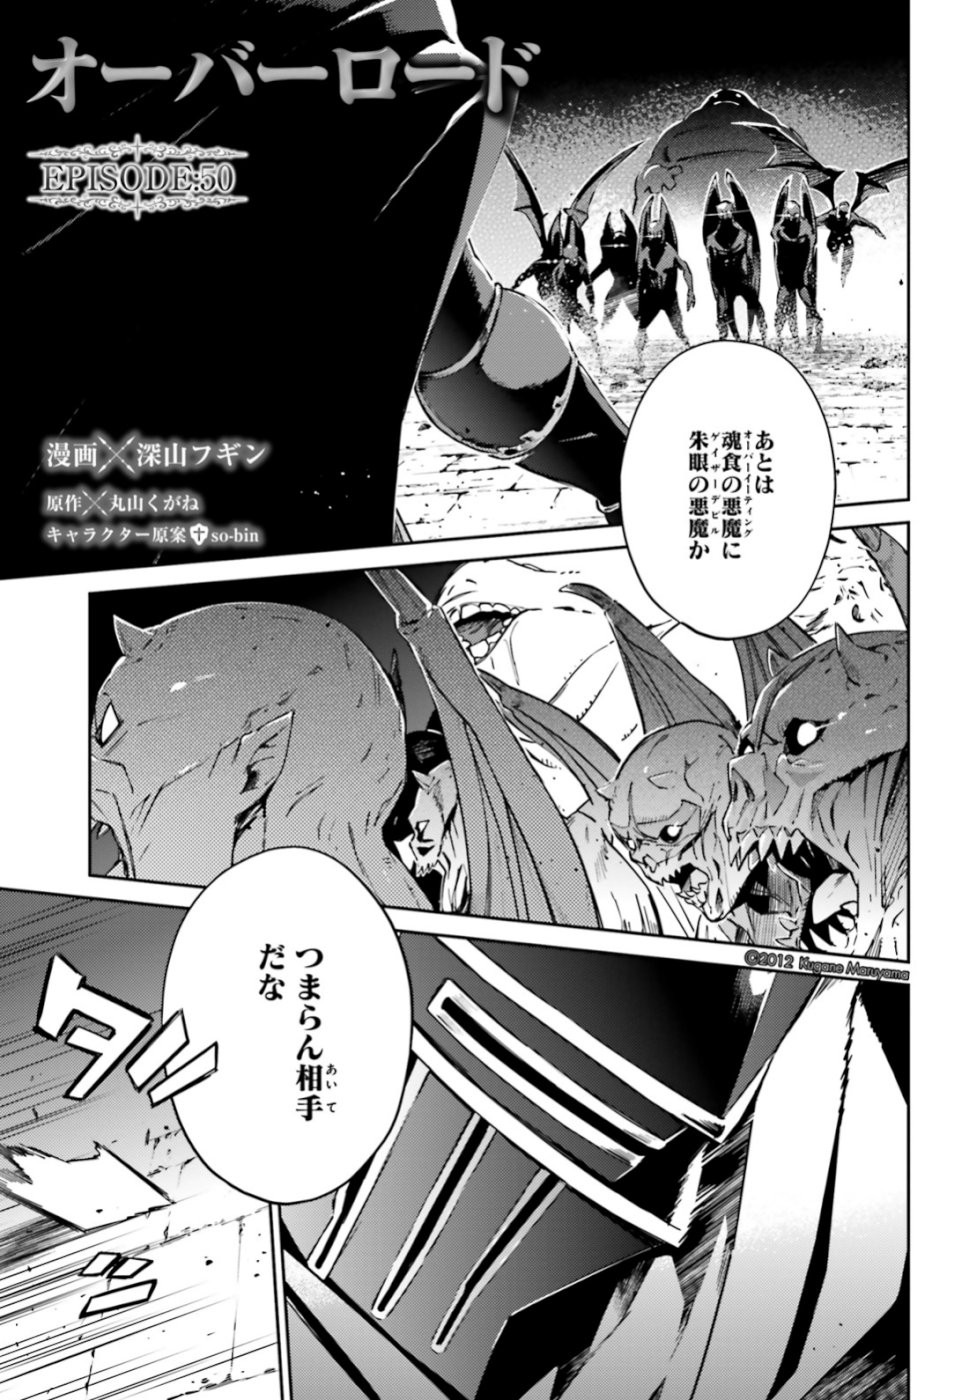 Overlord - Chapter 50 - Page 1